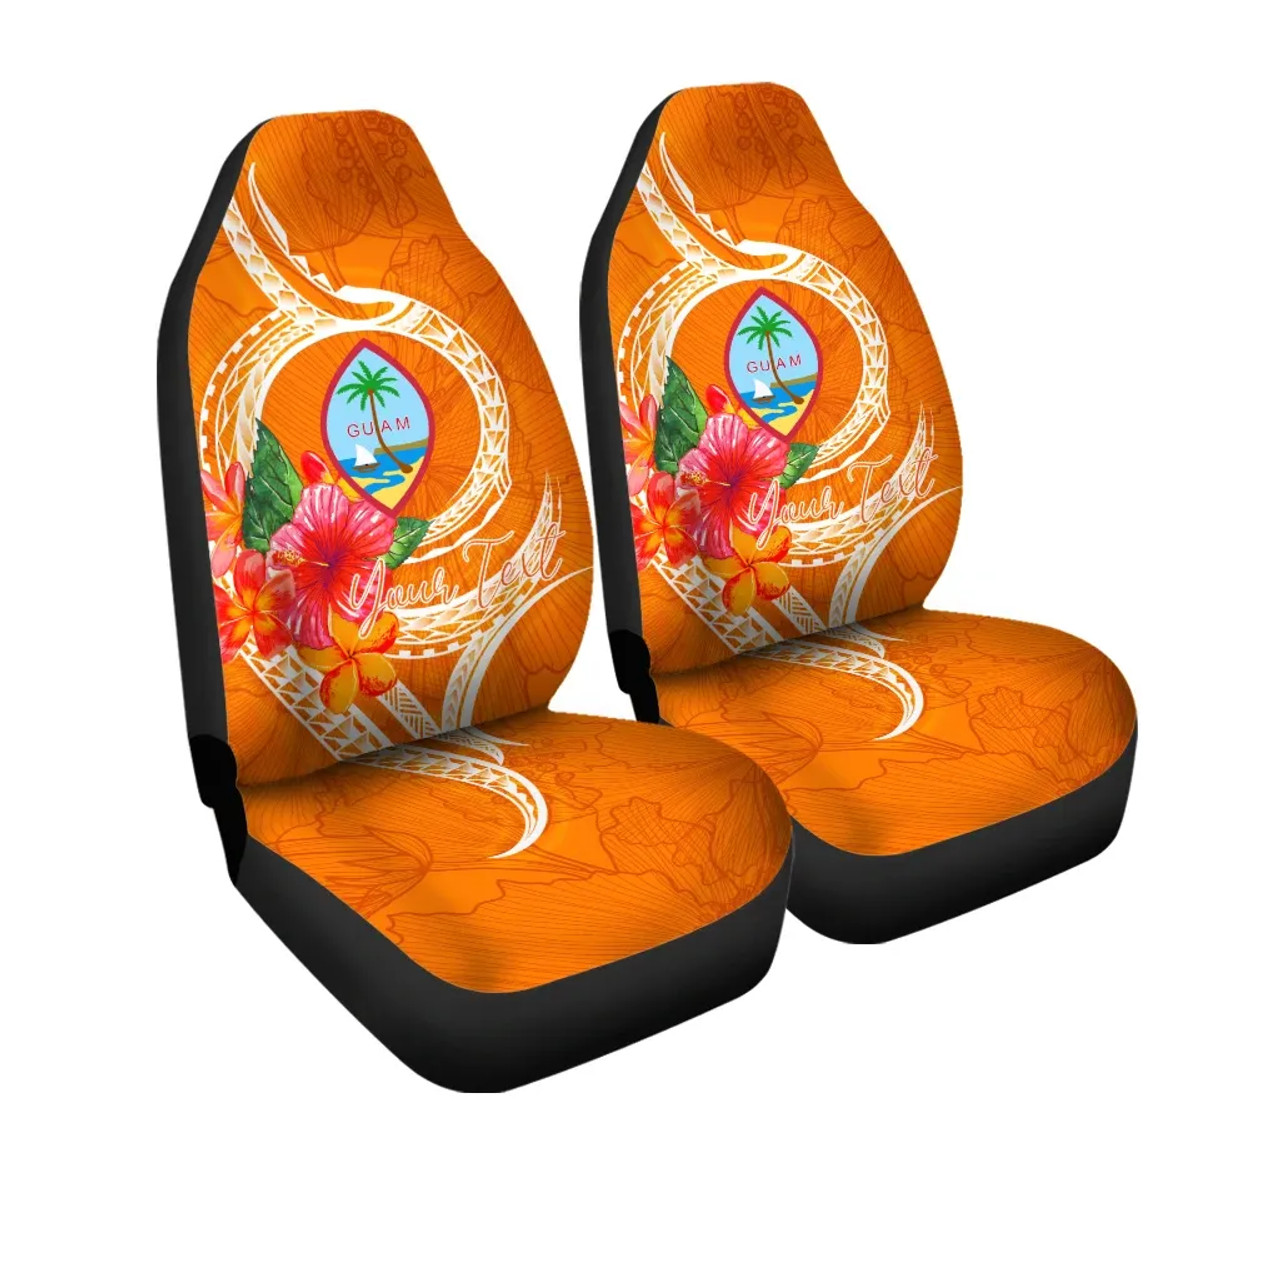 Guam Polynesian Custom Personalised Car Seat Covers - Orange Floral With Seal